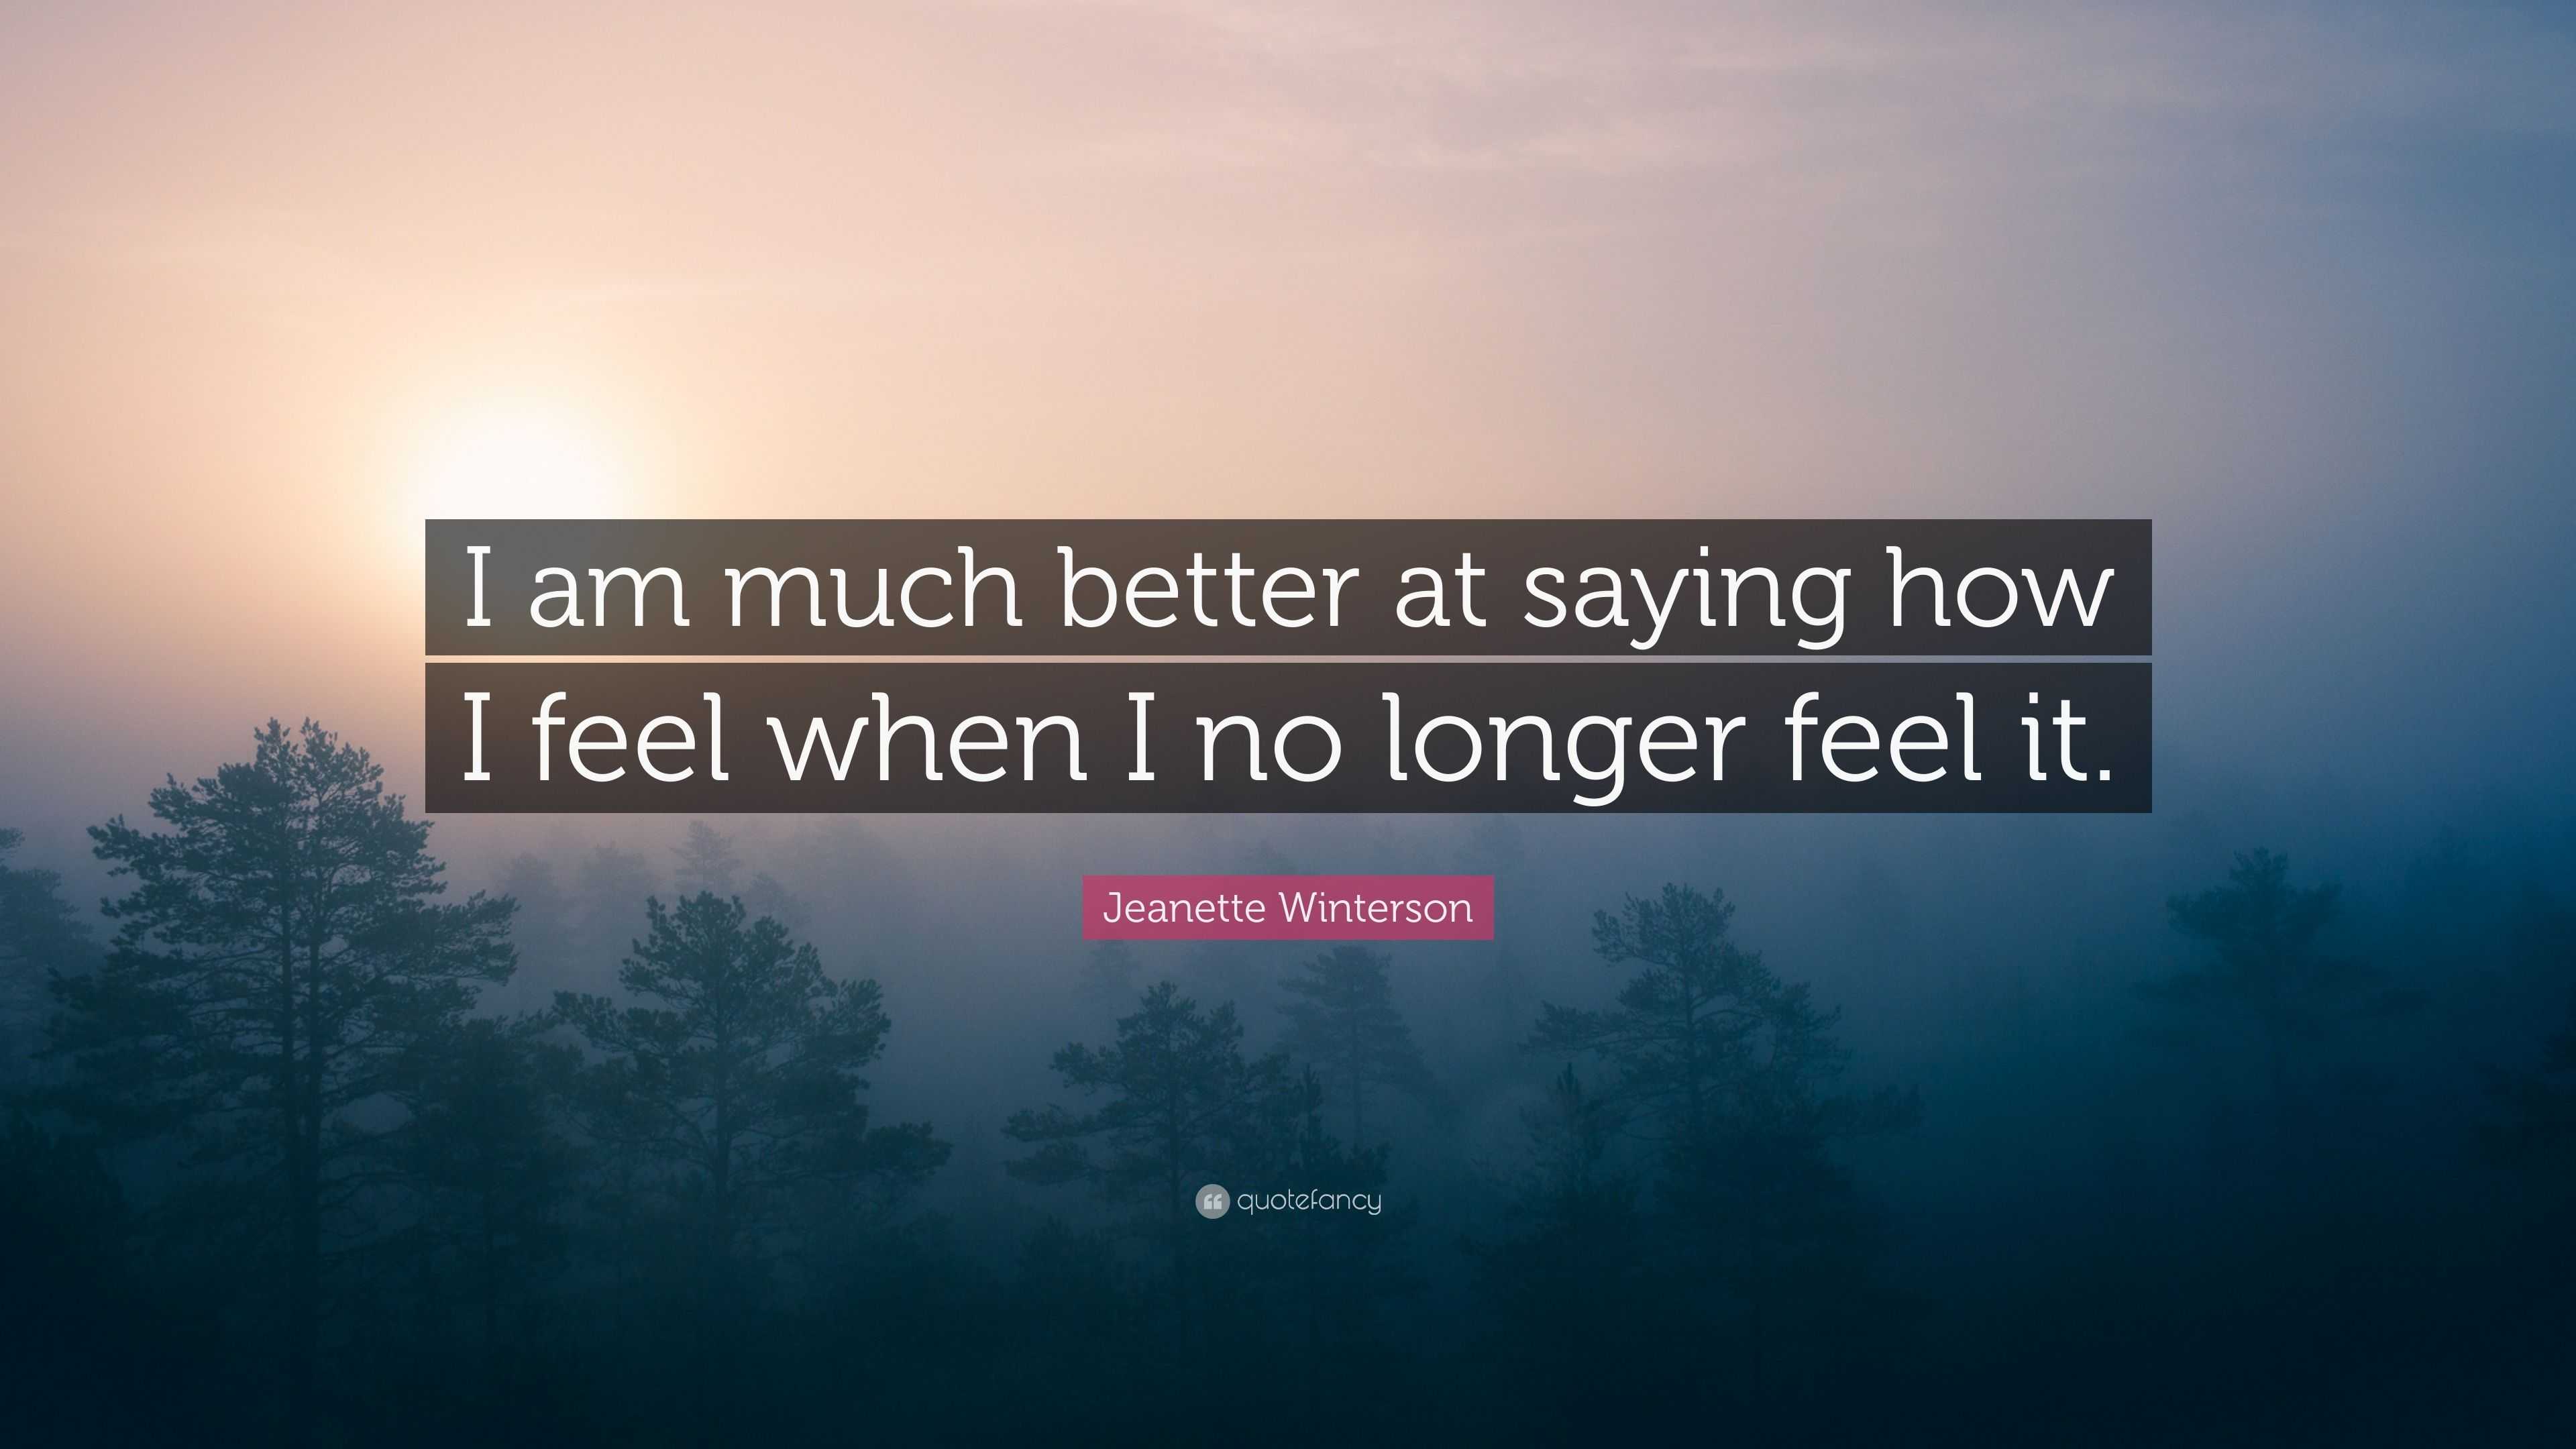 Jeanette Winterson Quote “i Am Much Better At Saying How I Feel When I